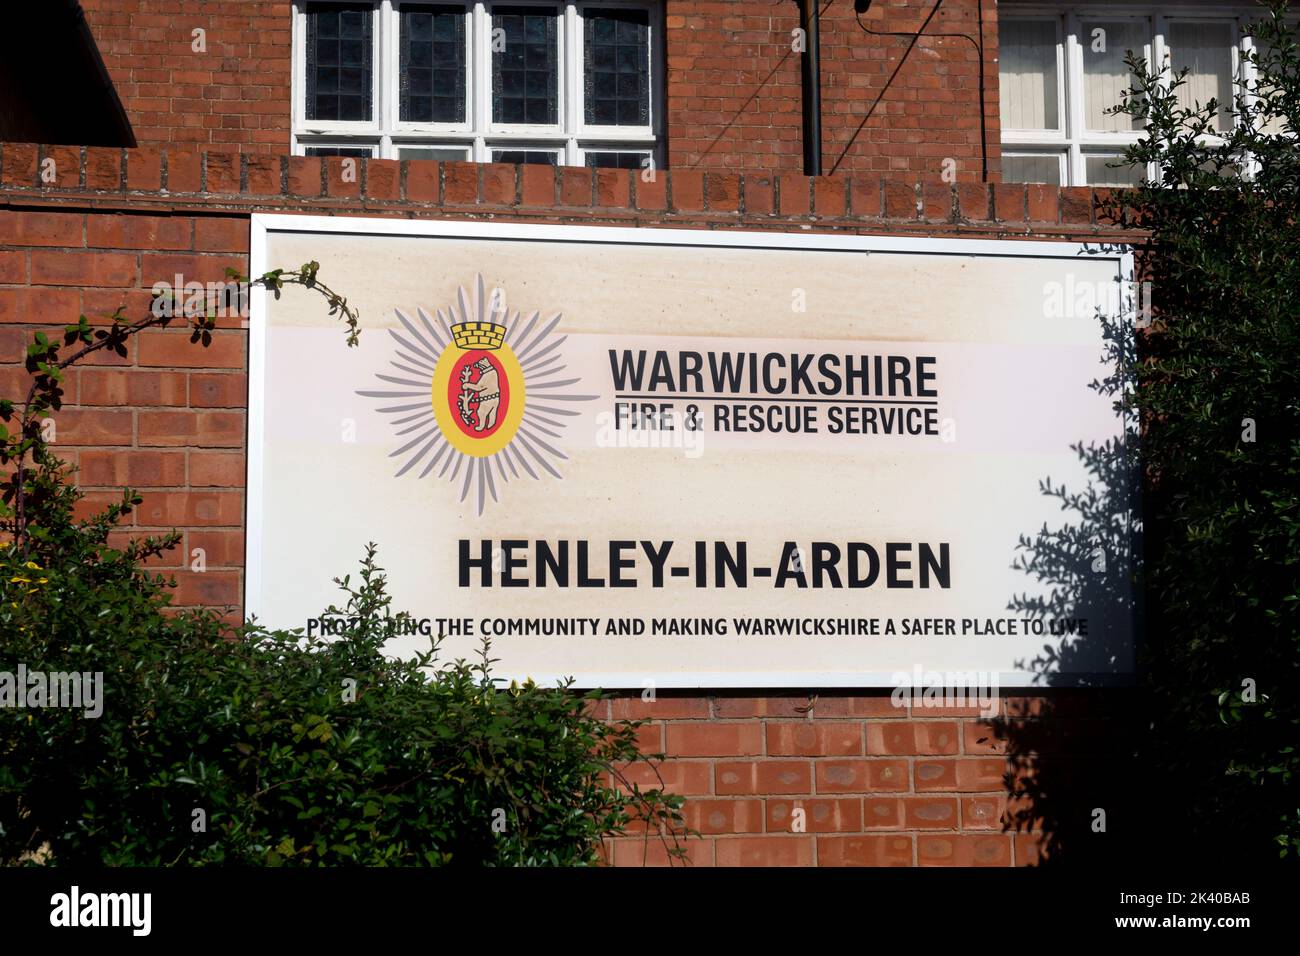 Henley-in-Arden fire station sign, Warwickshire, England, UK Stock Photo